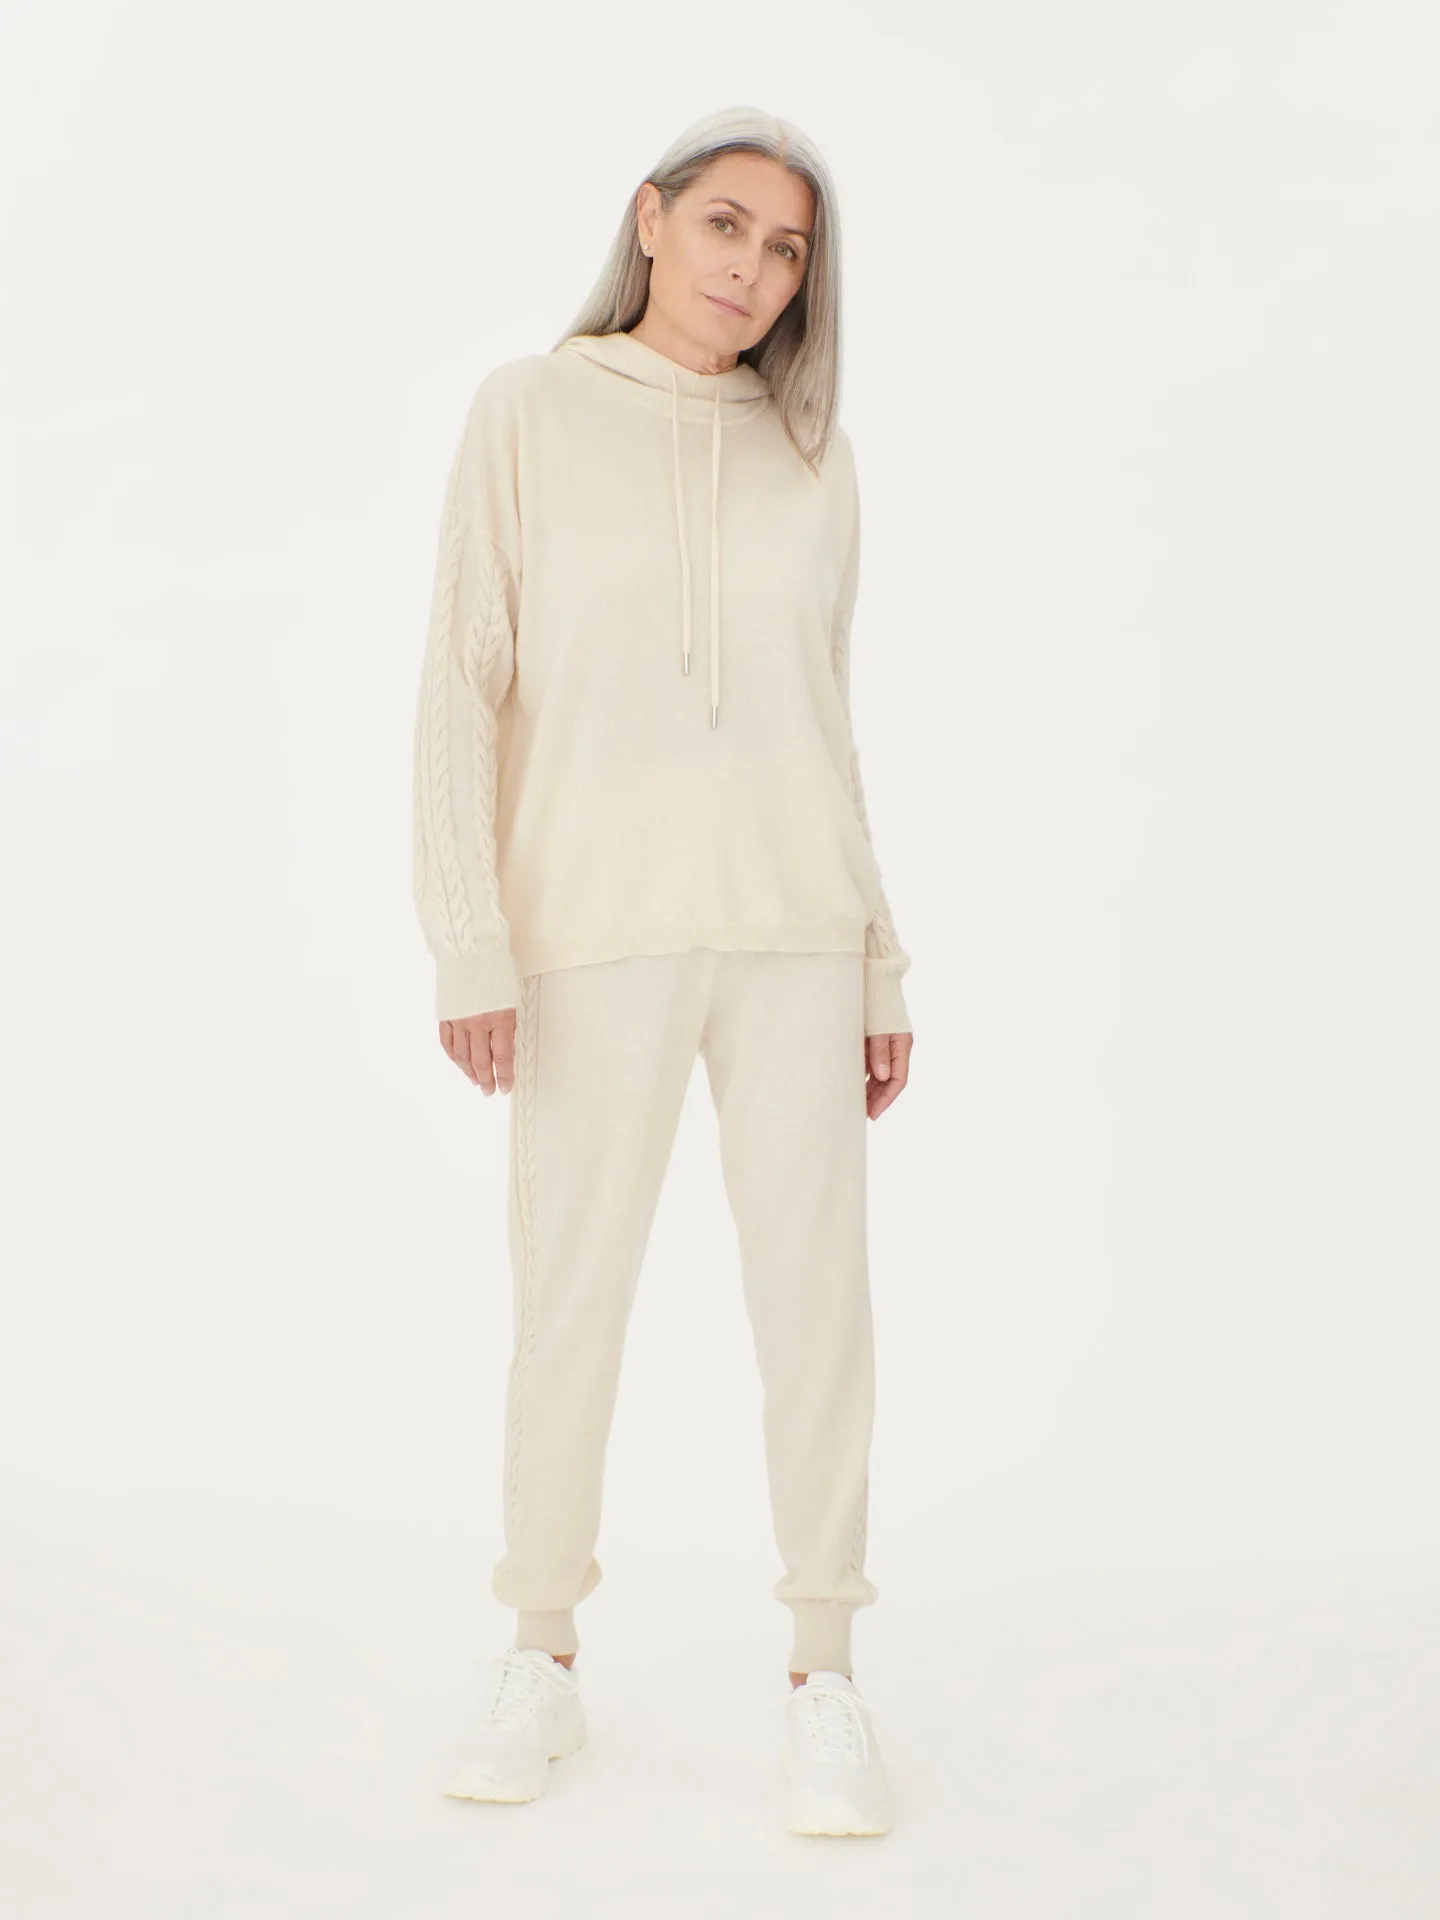 Women's Cashmere Hoodie With Cable Knitted Sleeves Off White - Gobi Cashmere